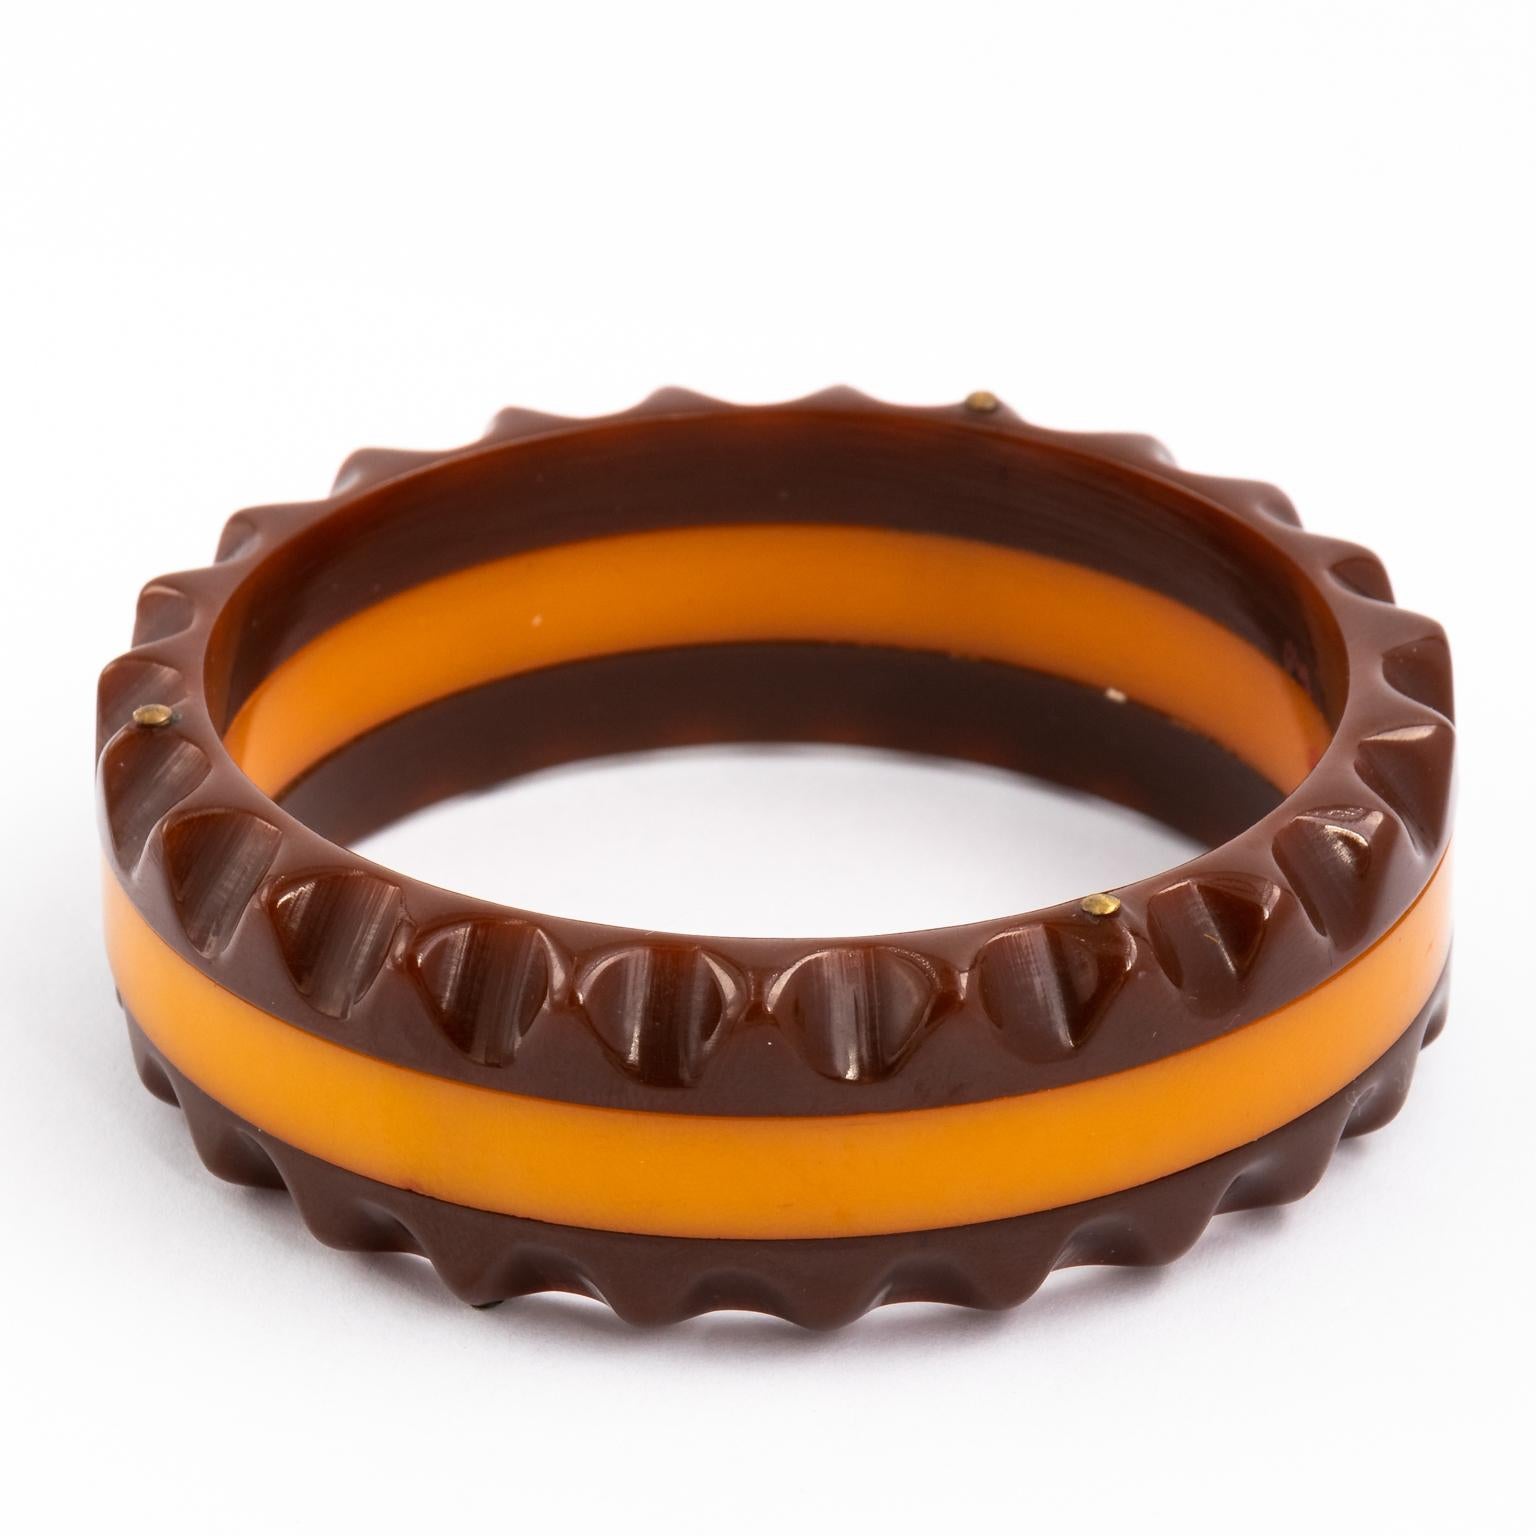 Circa 1930 Art Deco butterscotch maroon bracelet in Bakelite. It is almost one inch wide. It has a saber tooth style edge on both sides.
